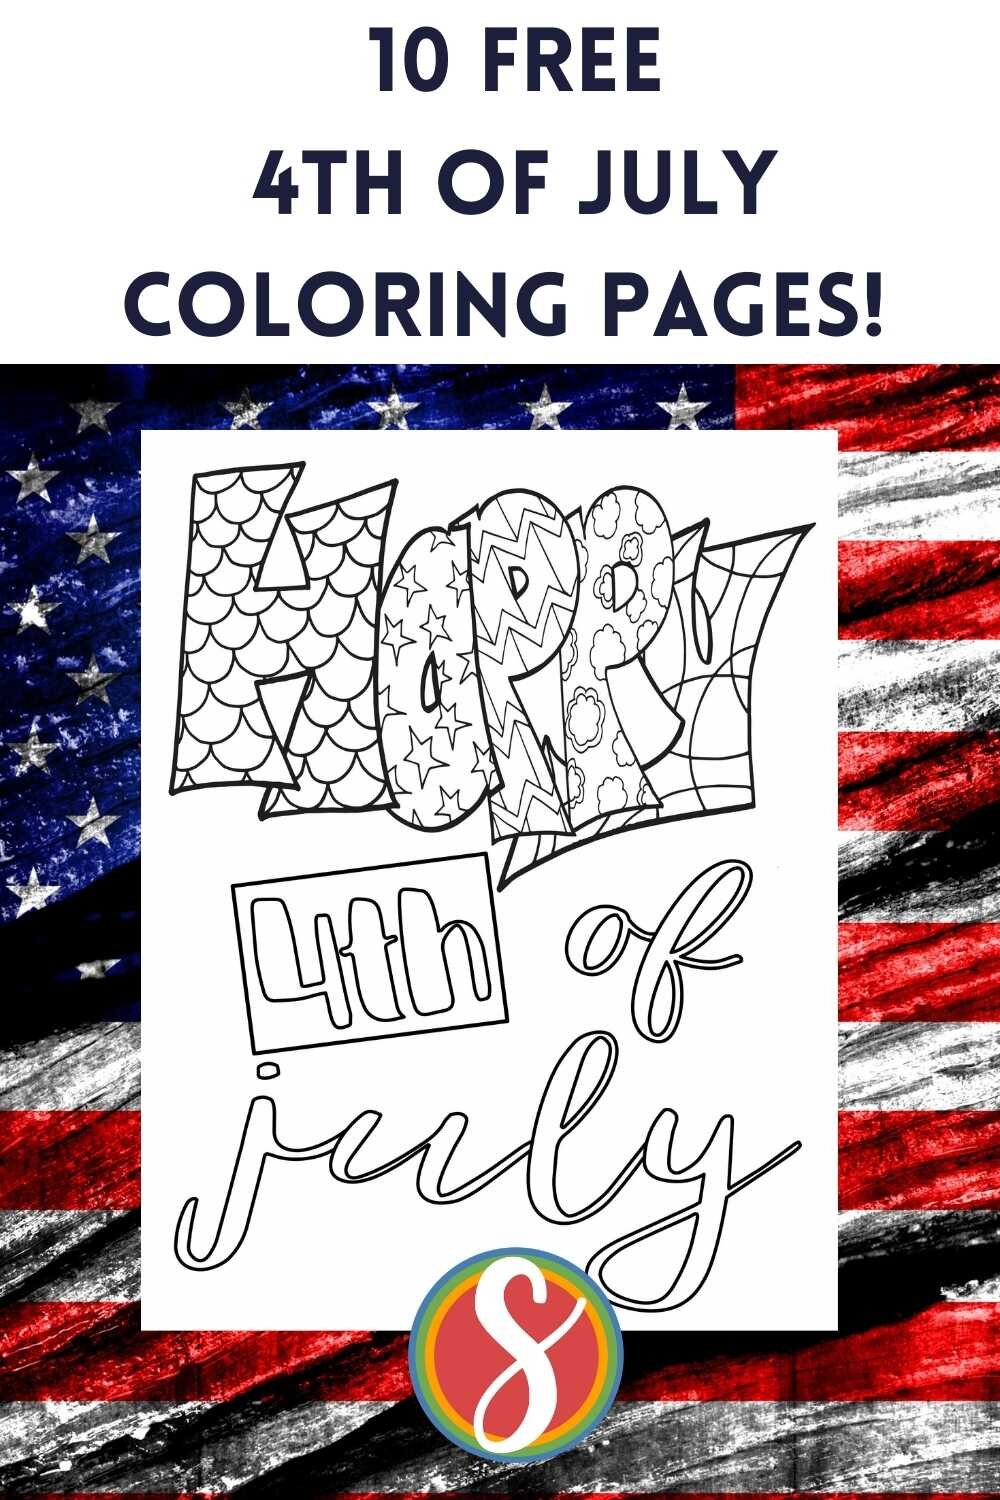 happy 4th of july coloring page, "Happy" is bubble letters with doodles inside